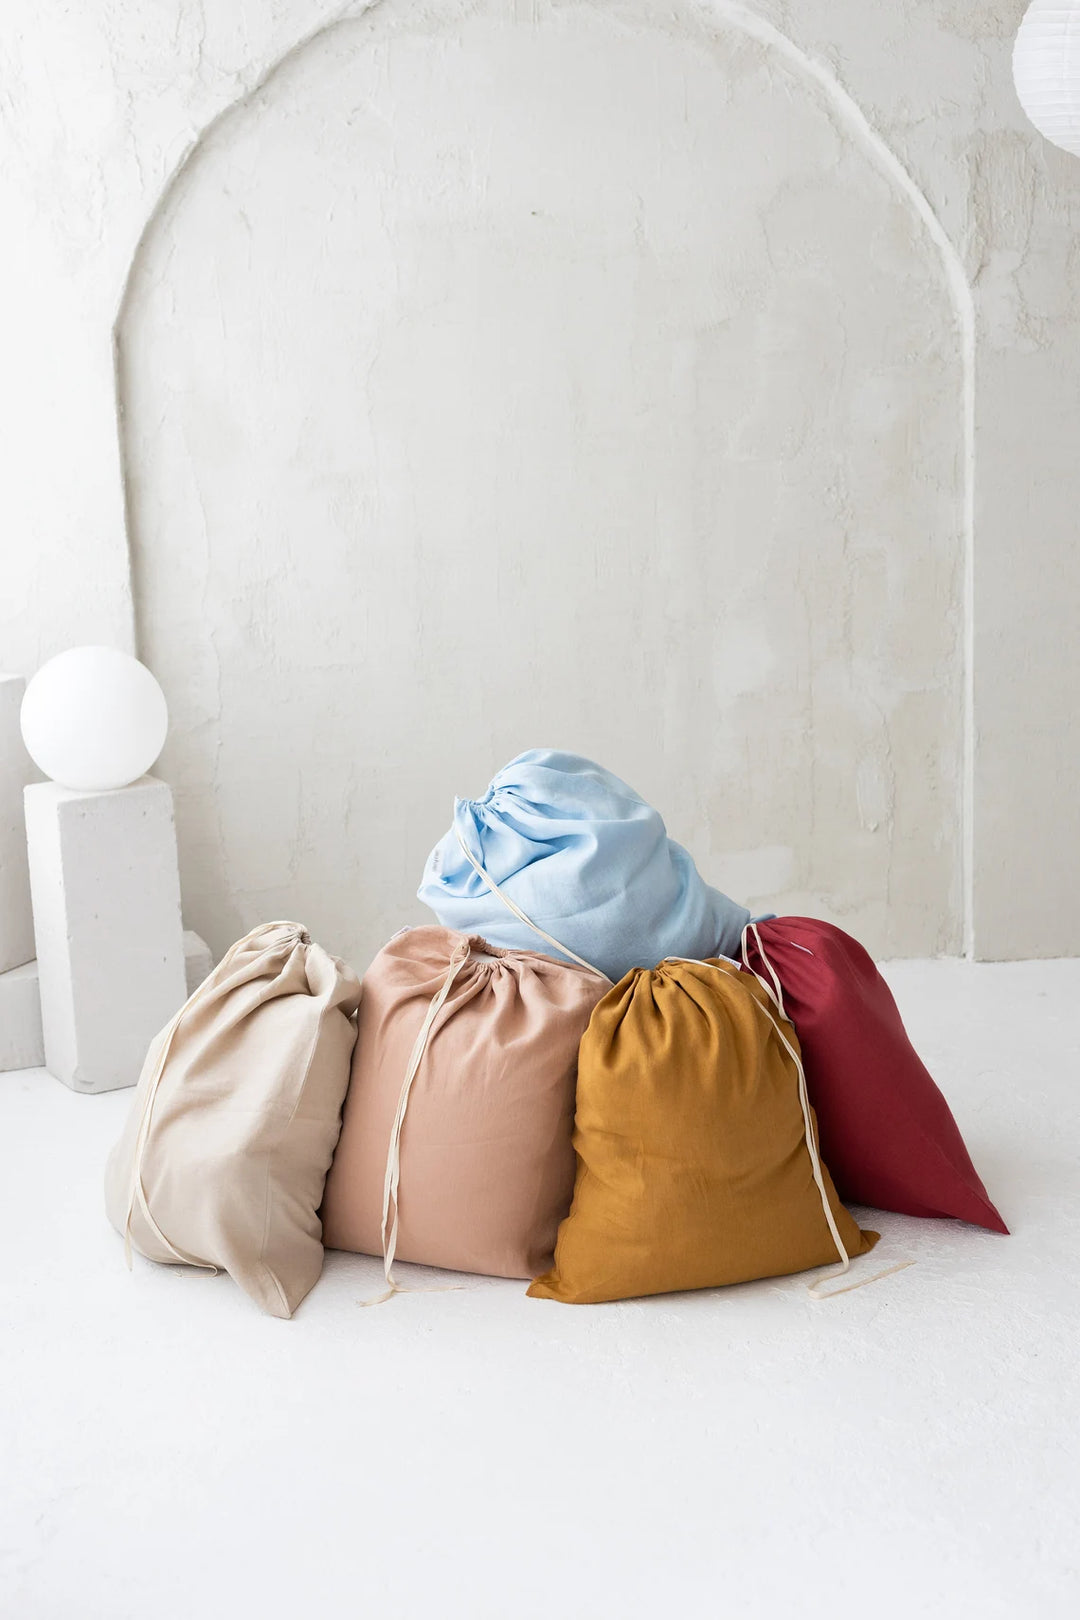 Linen Laundry Bag In Natural Color 1 - Daily Linen